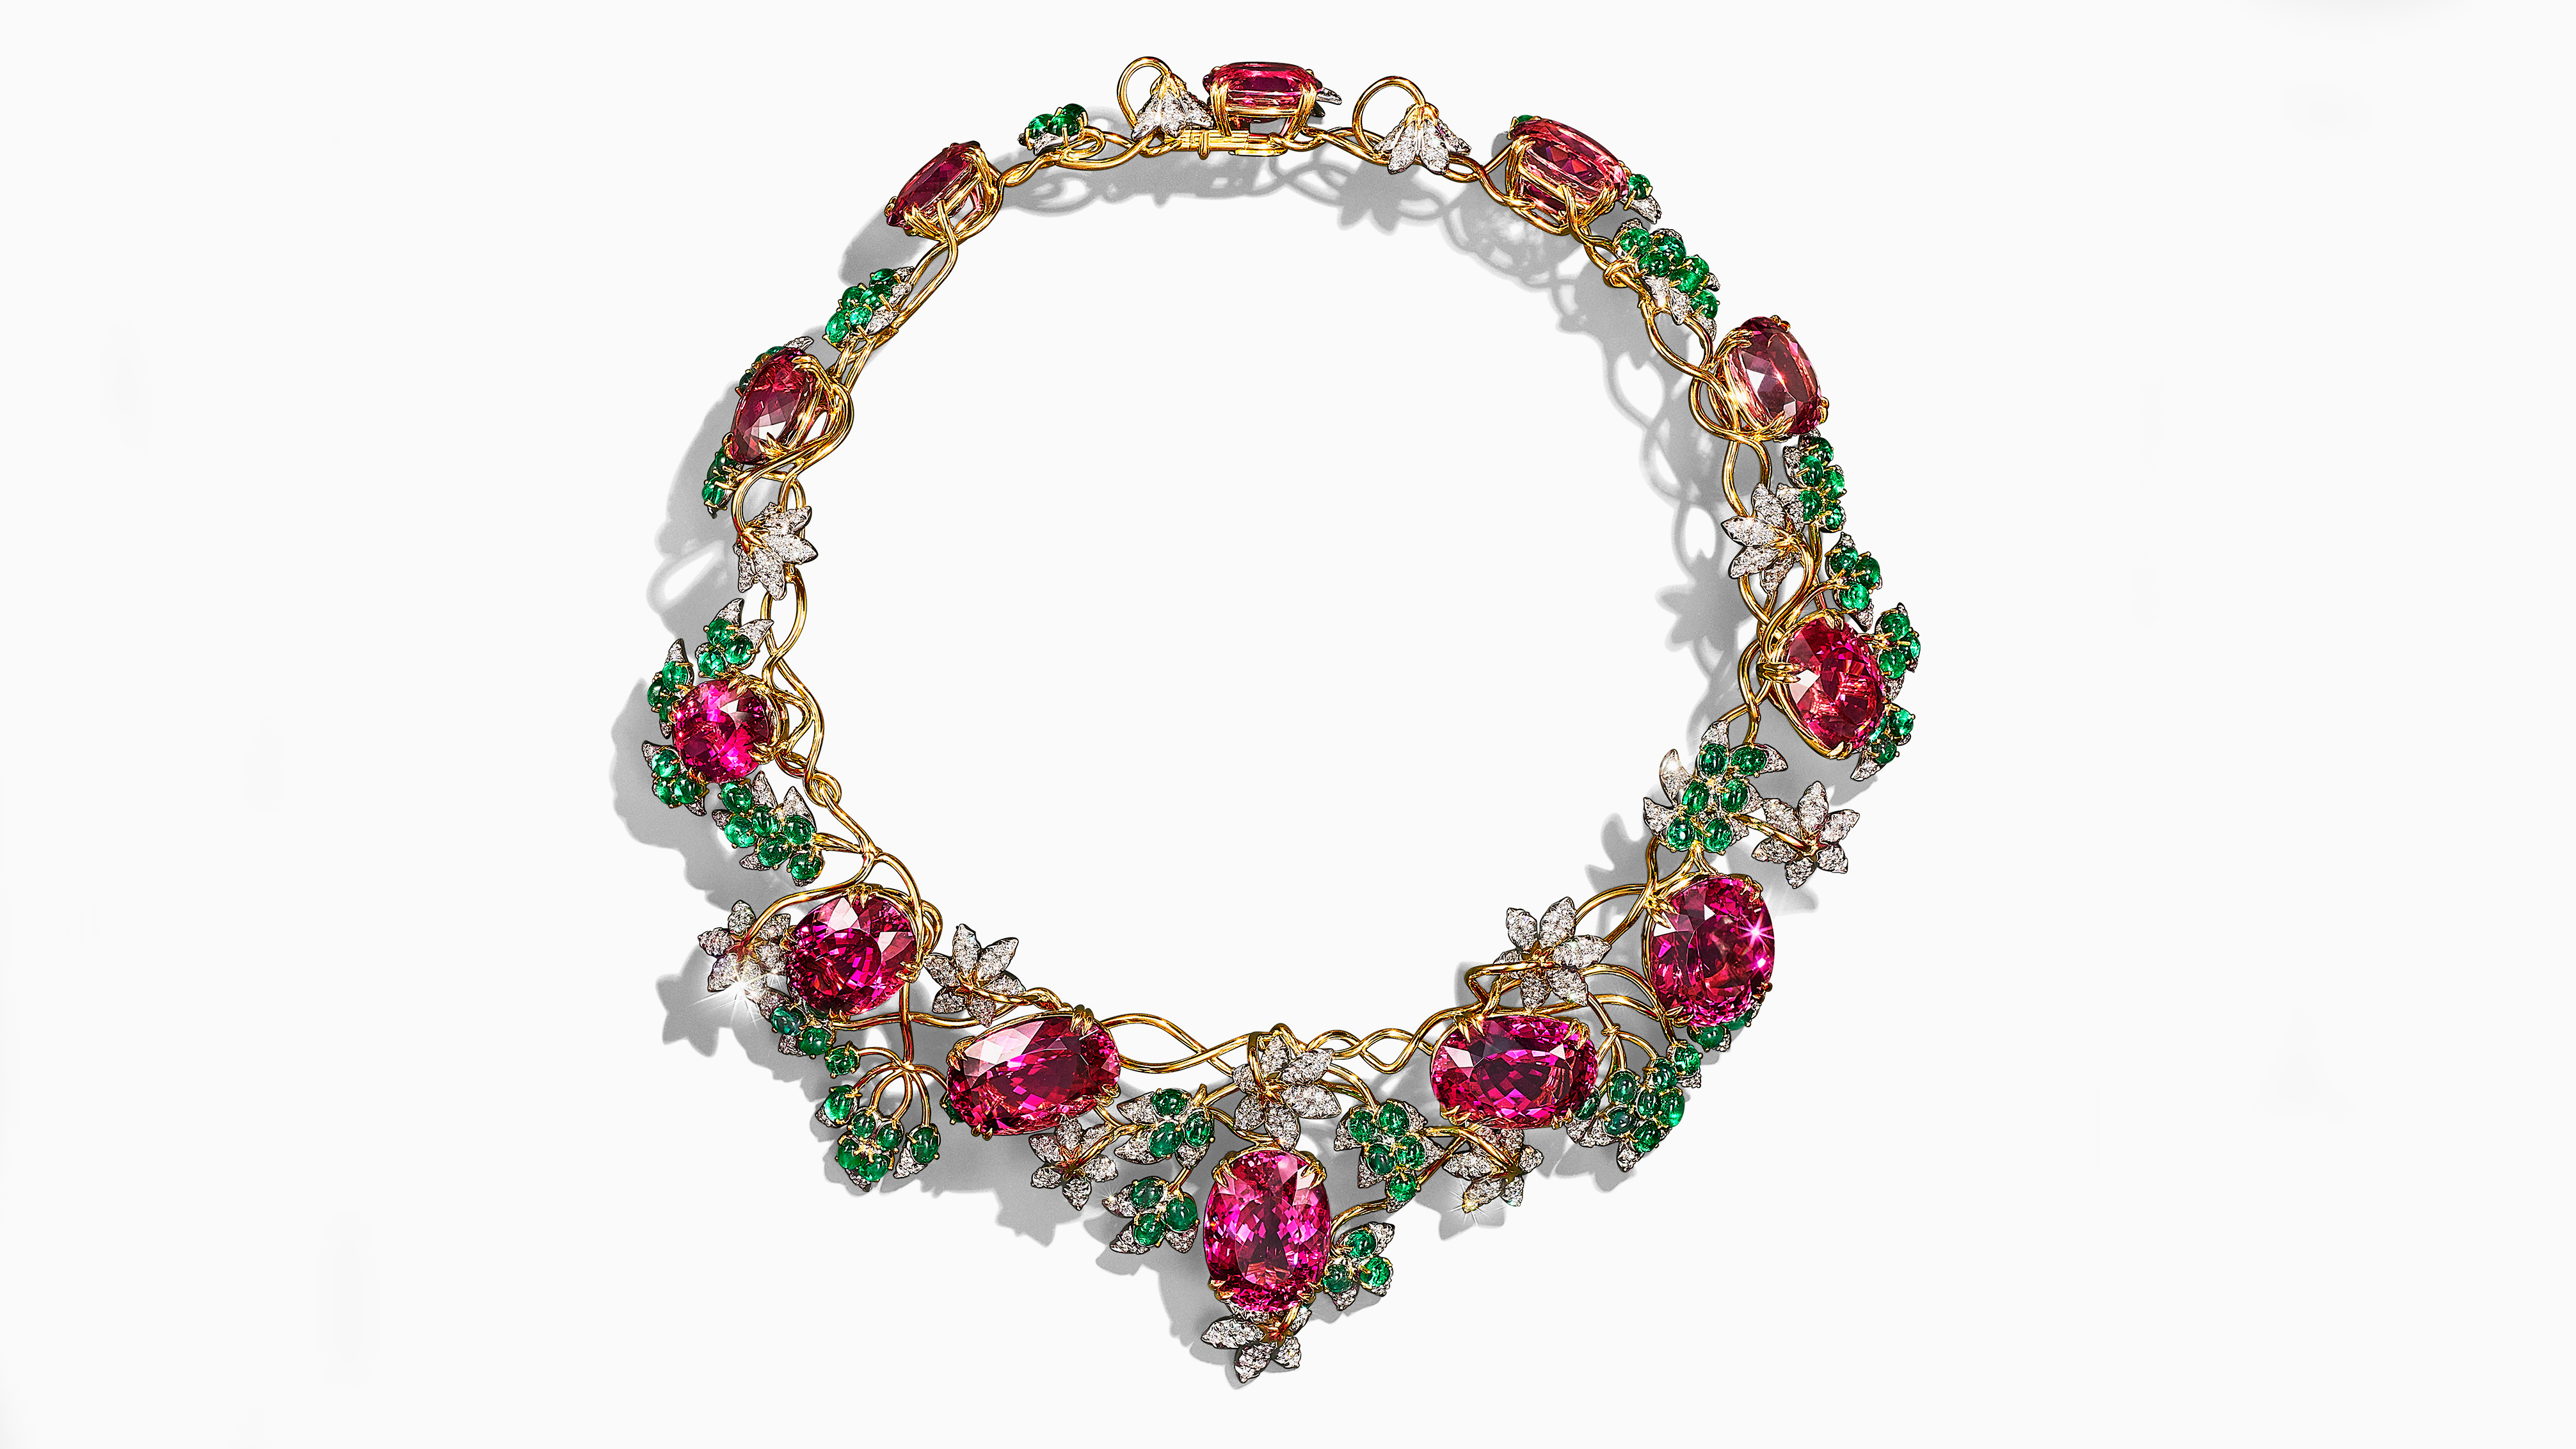 Tiffany & Co.'s BOTANICA Floral High jewellery Collection